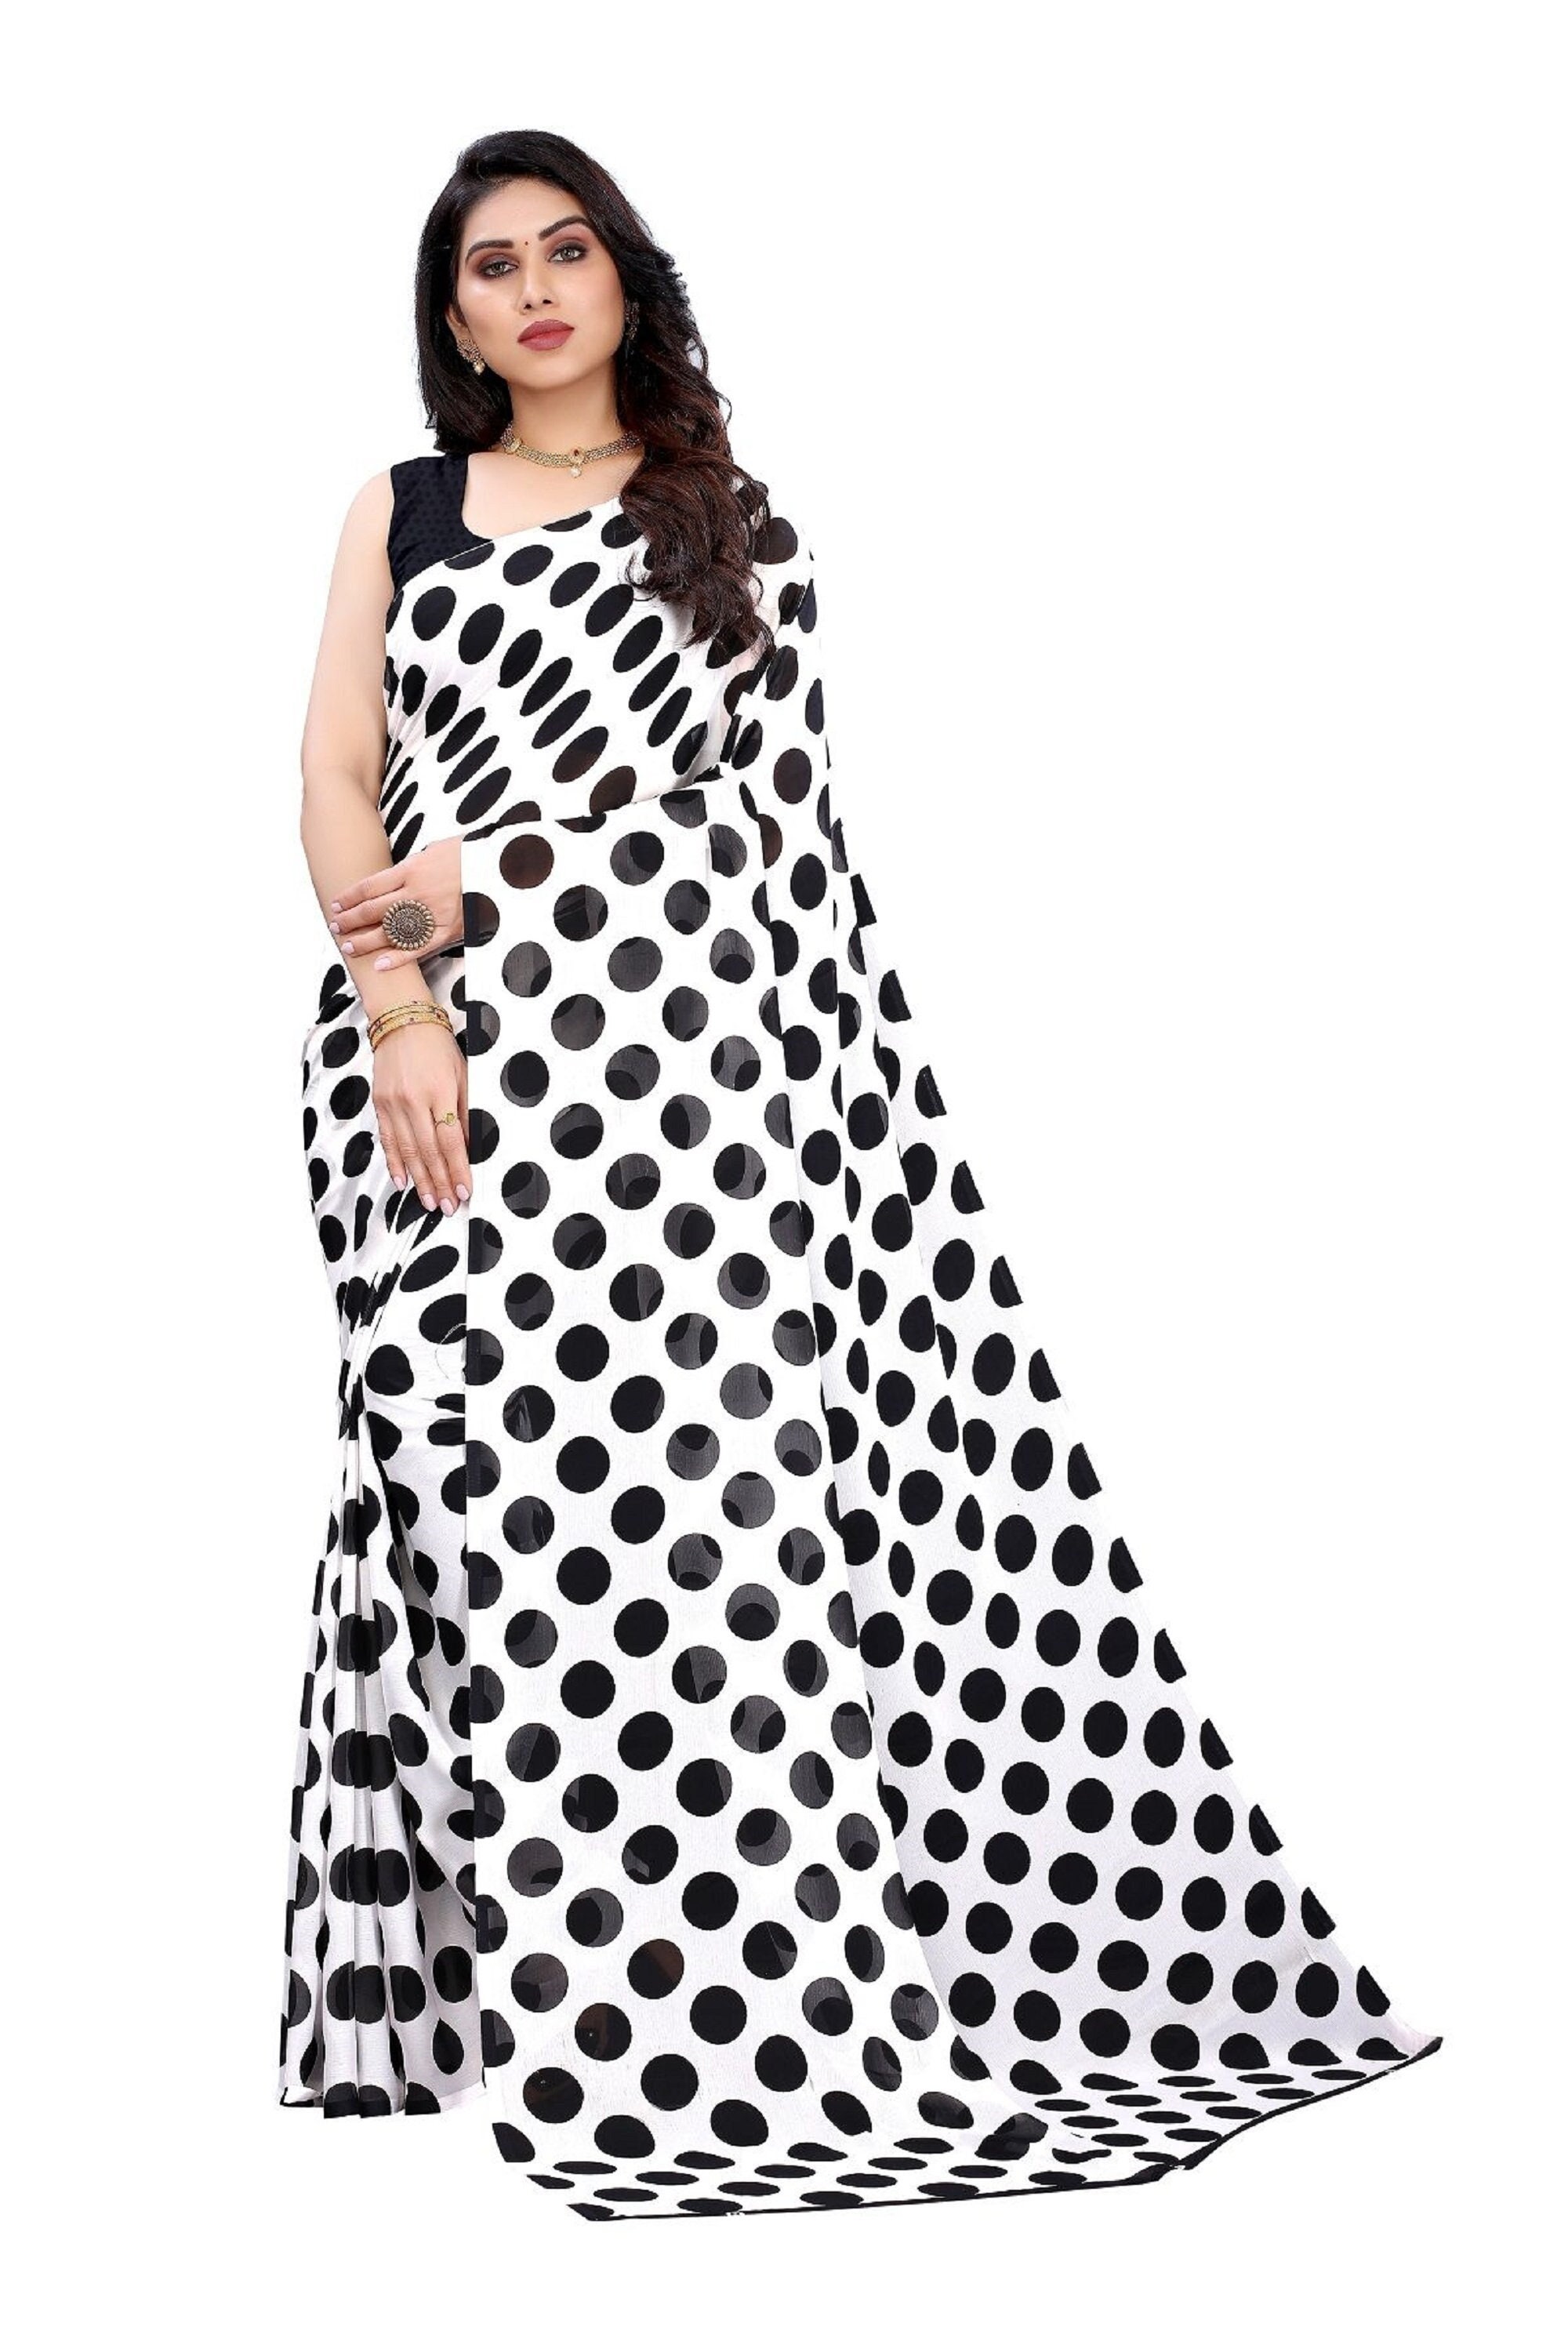 most trending and gorgeous daily work wear Polka dot Blouses design in  black and white for women 